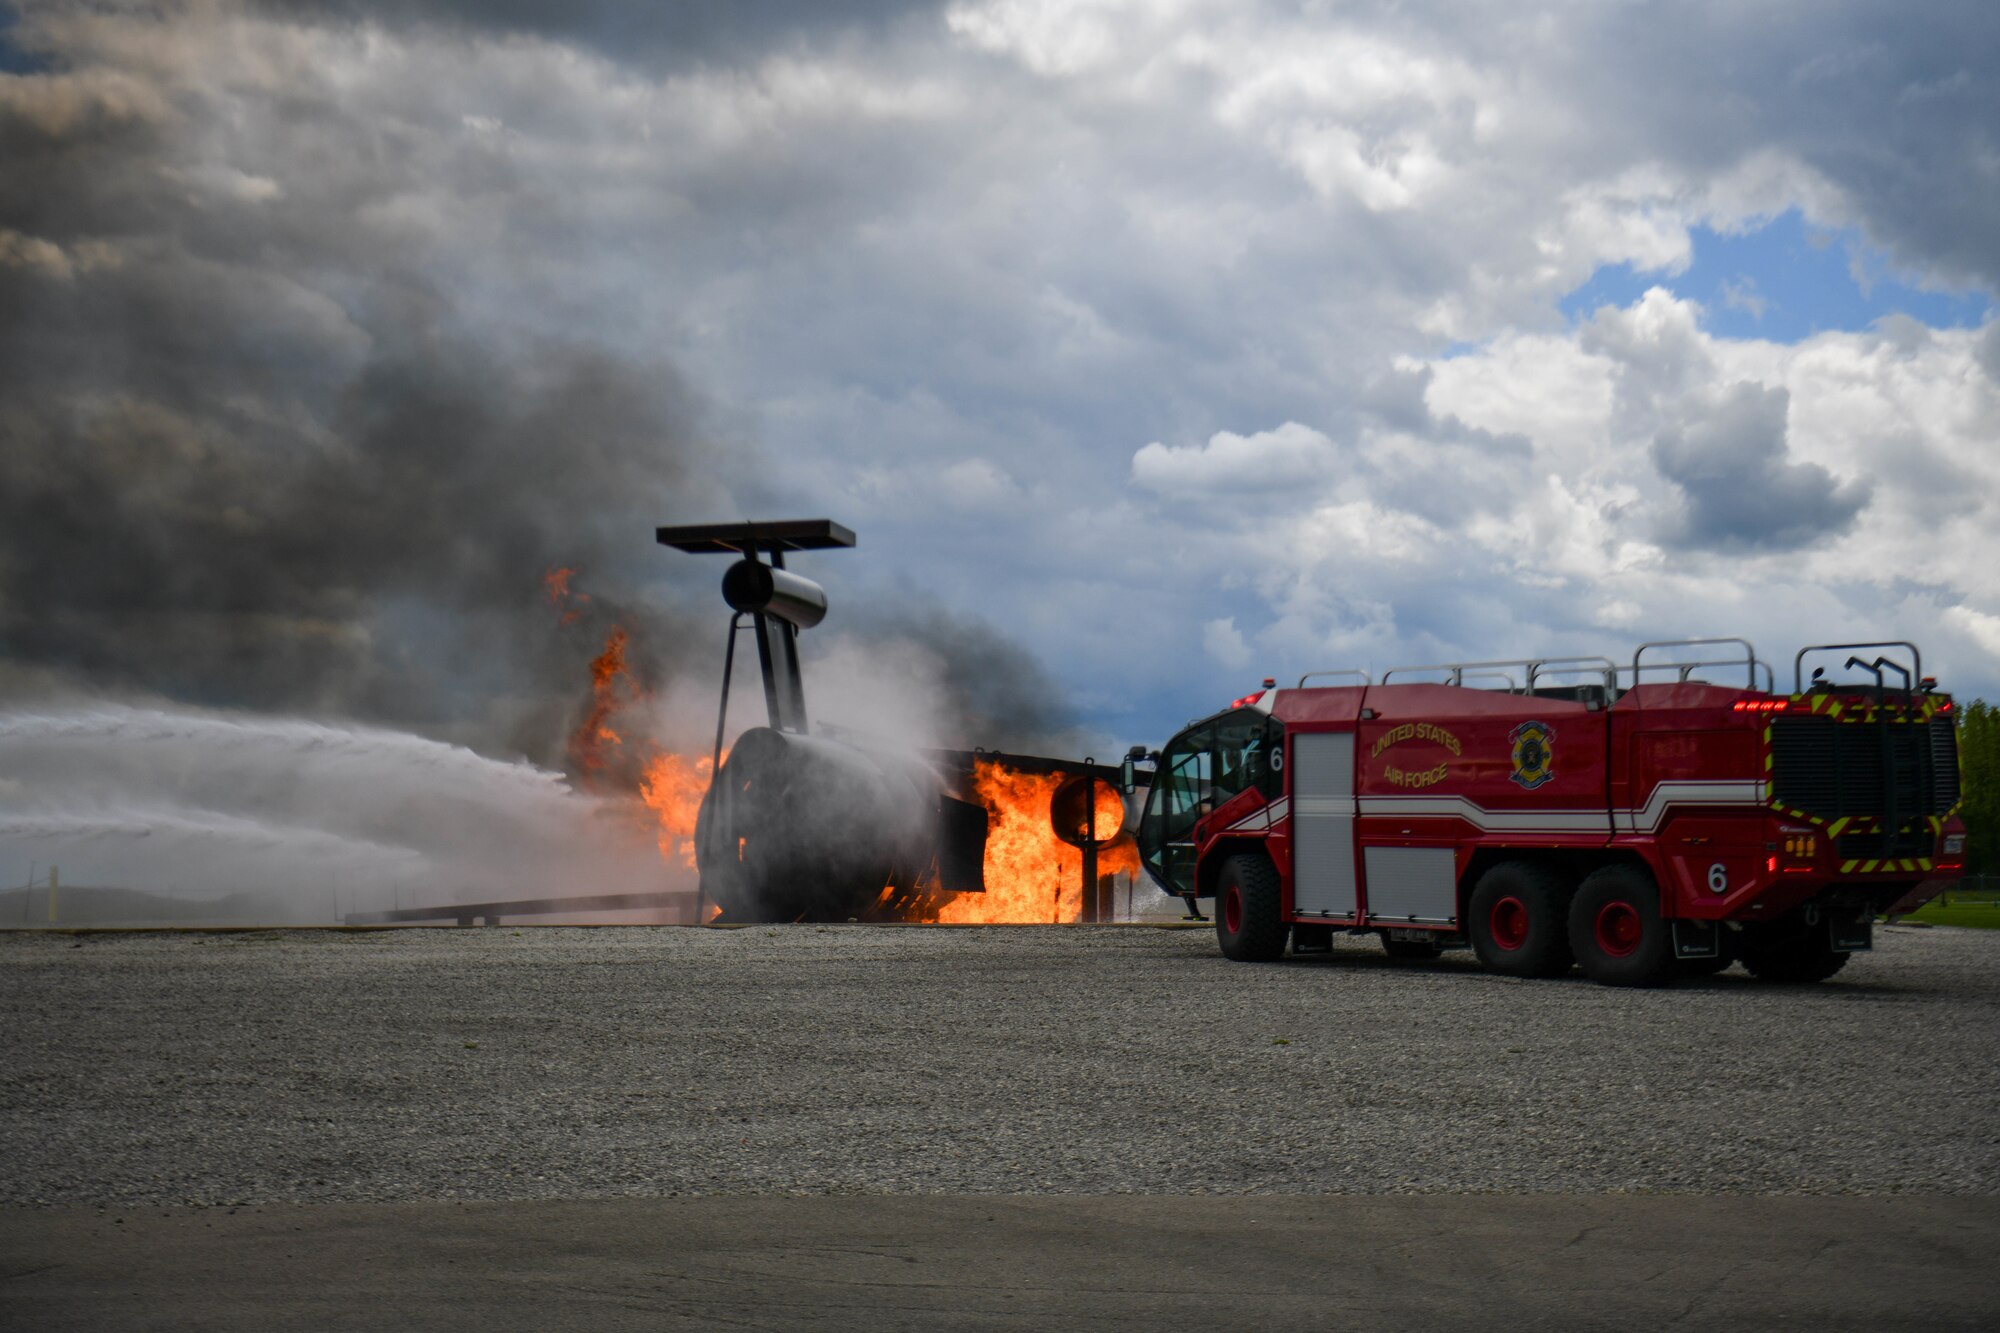 Fire engine 6 sprays water on a mock aircraft crash at the firefighter training area as part of a demonstration during a local educator installation tour at Youngstown Air Reserve Station, Ohio, May 10, 2024.